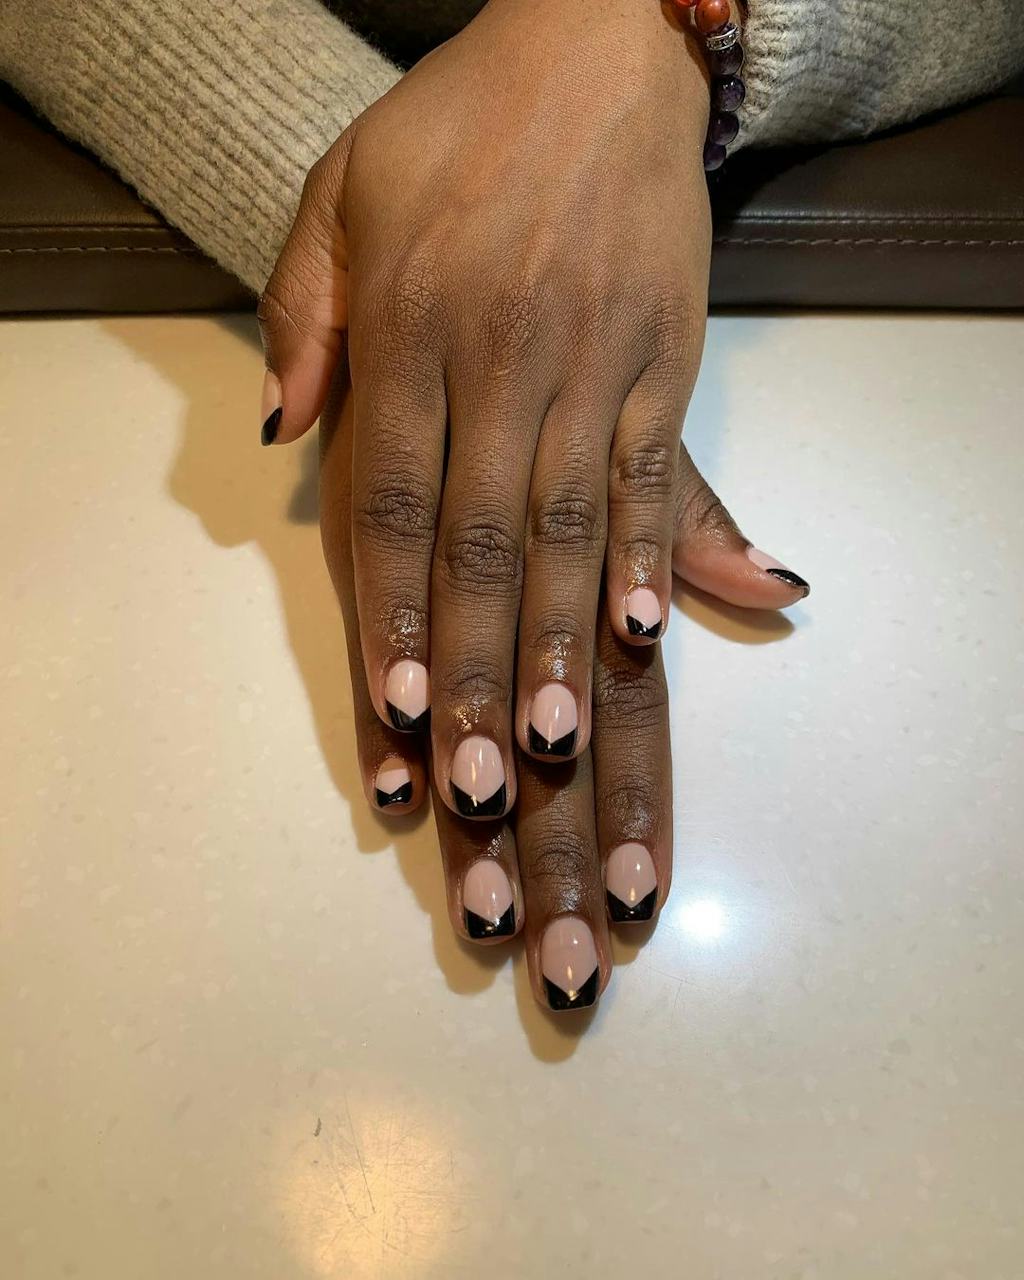 7 Black French Tip Nail Designs To Try For An Edgy Spring Manicure